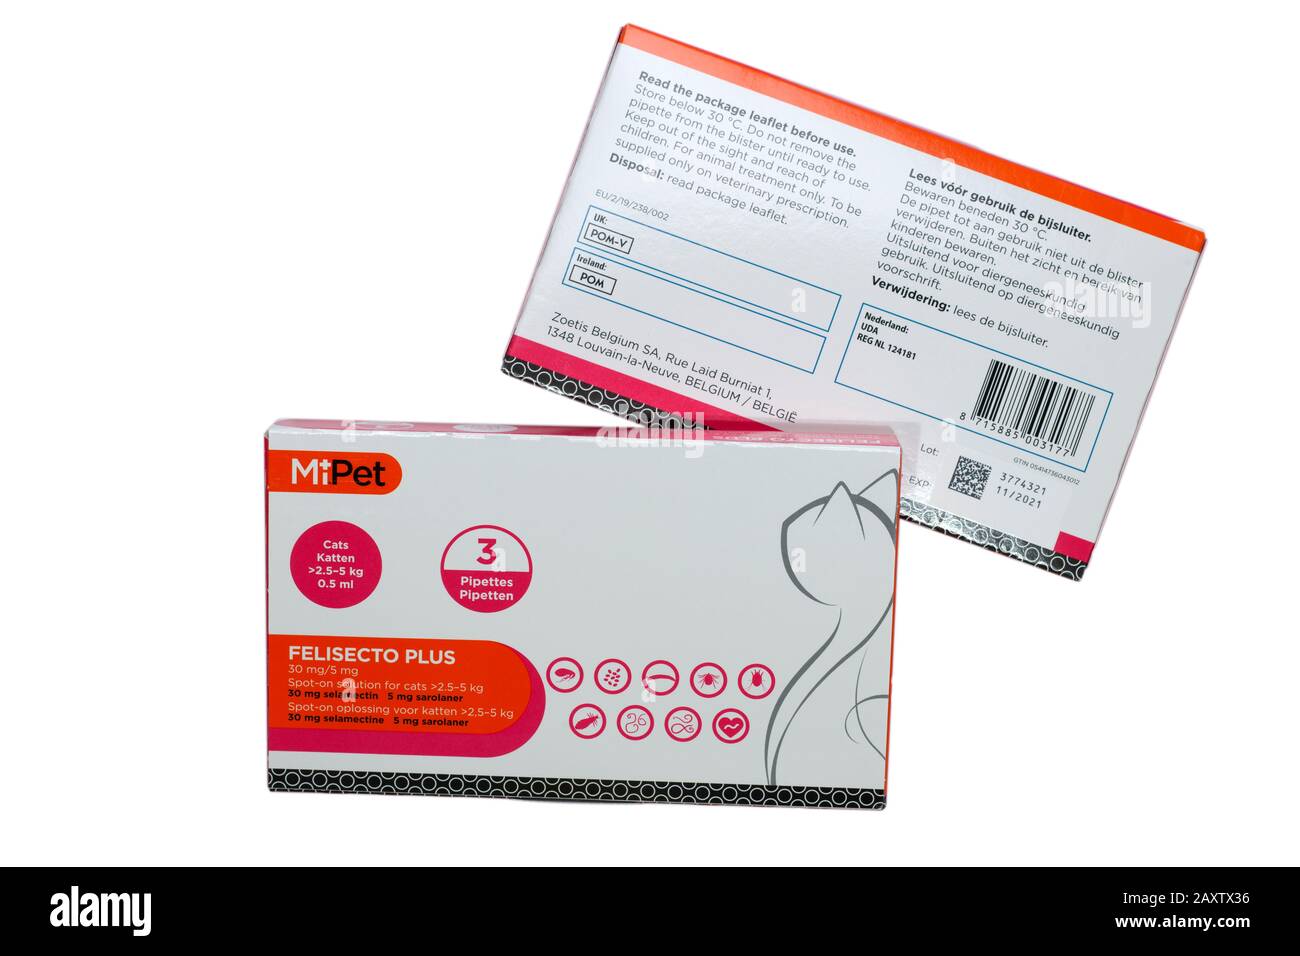 Two boxes containing three pipettes each of Mi.pet Felisecto Plus for cats weighing  2.5 - 5 kg Flea treatment Stock Photo